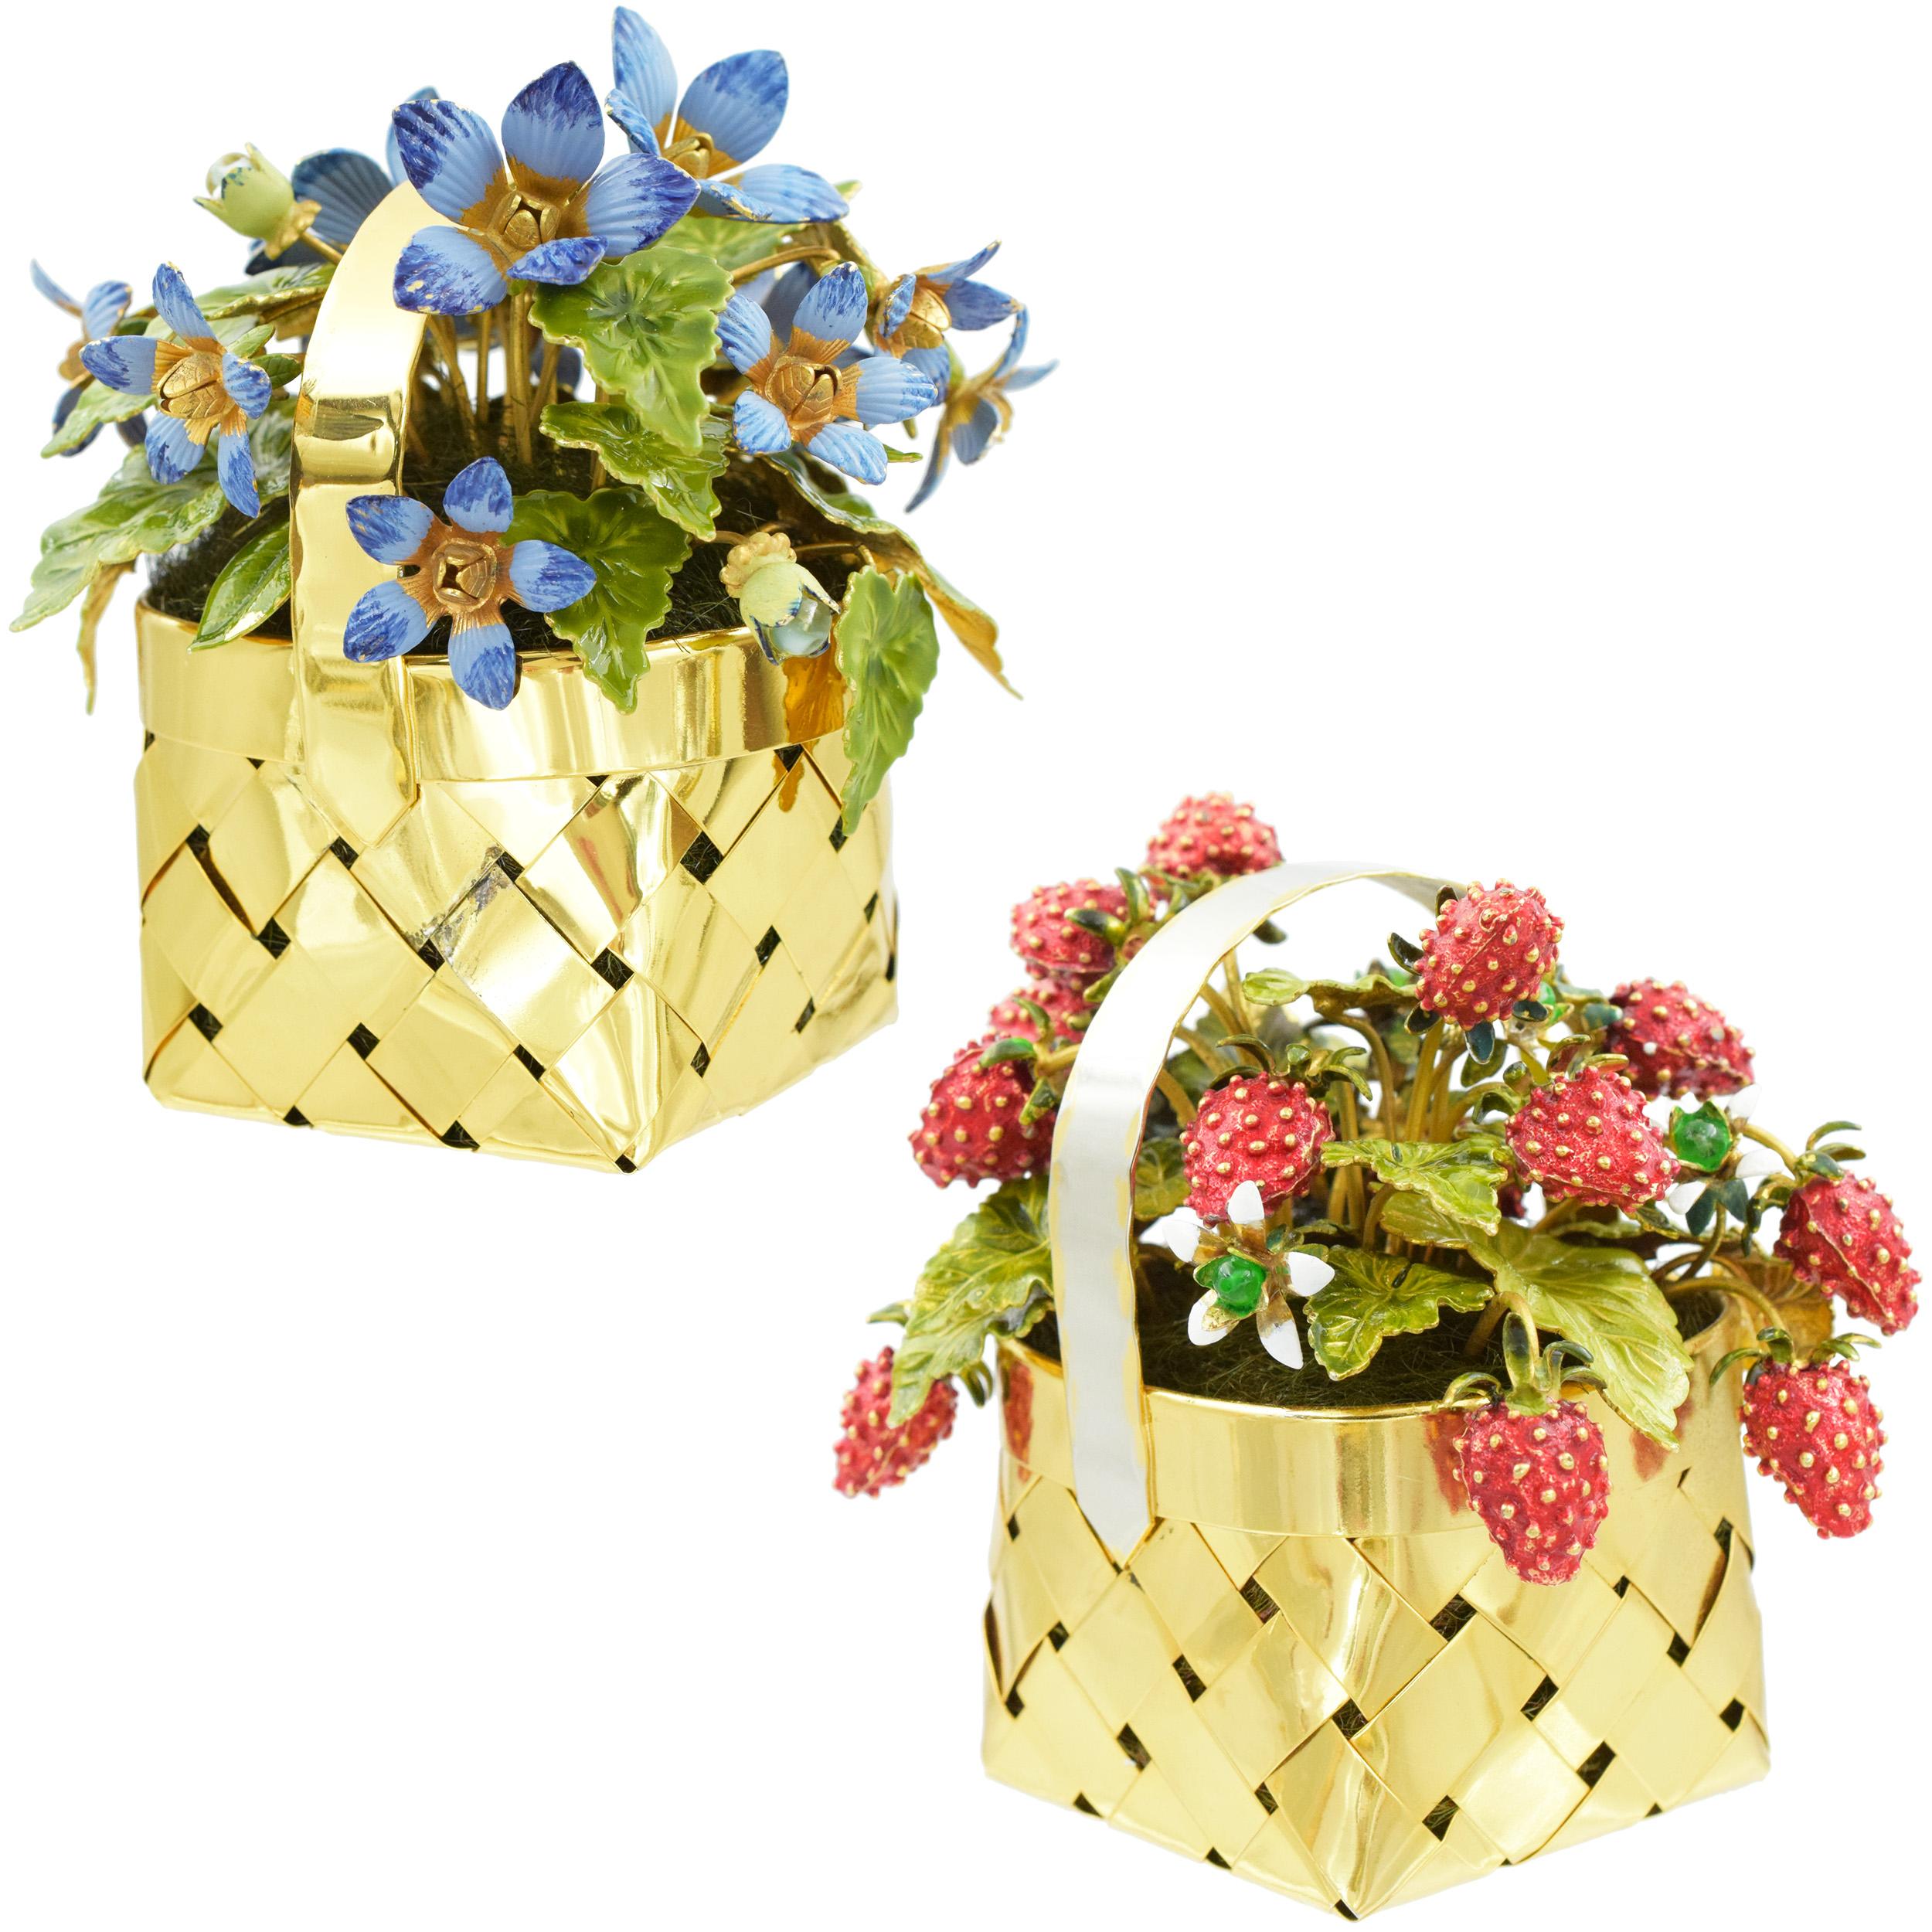 A pair of Cartier enamel and silver flower and fruit baskets. Circa 1950.
One of the baskets features strawberry plants with the fruits. The second basket features a plant with blue flowers. The pieces are accented with various colors of enamel and